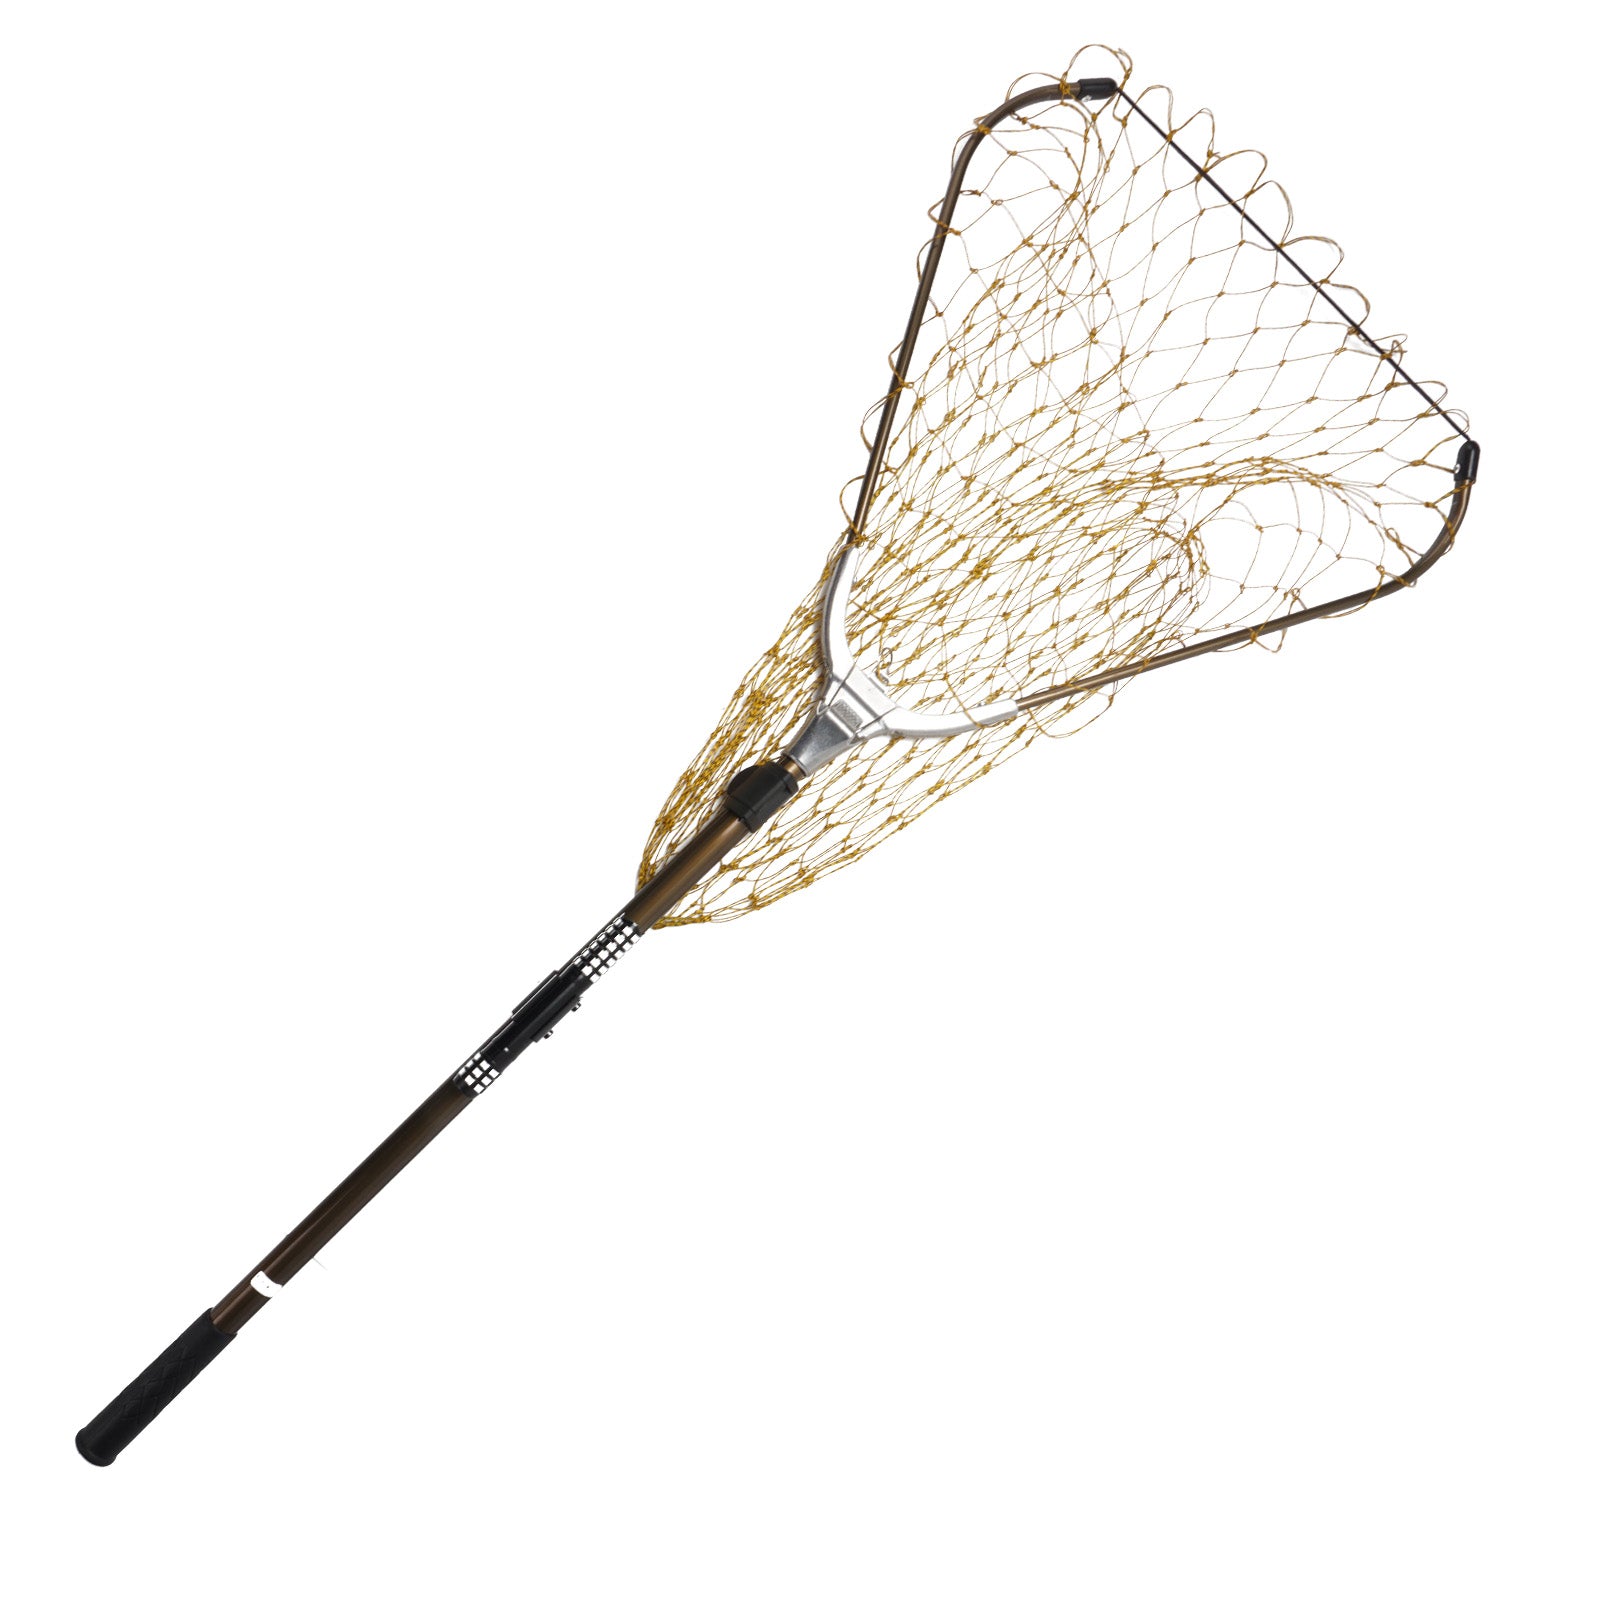 SYFRLLC Catch Pole Net with Telescopic Handle,Animal Catcher Net for Cat,Rabbit,Chicken,Duck,Goose,Fish,Racoon,and Other Poultry Wildlife